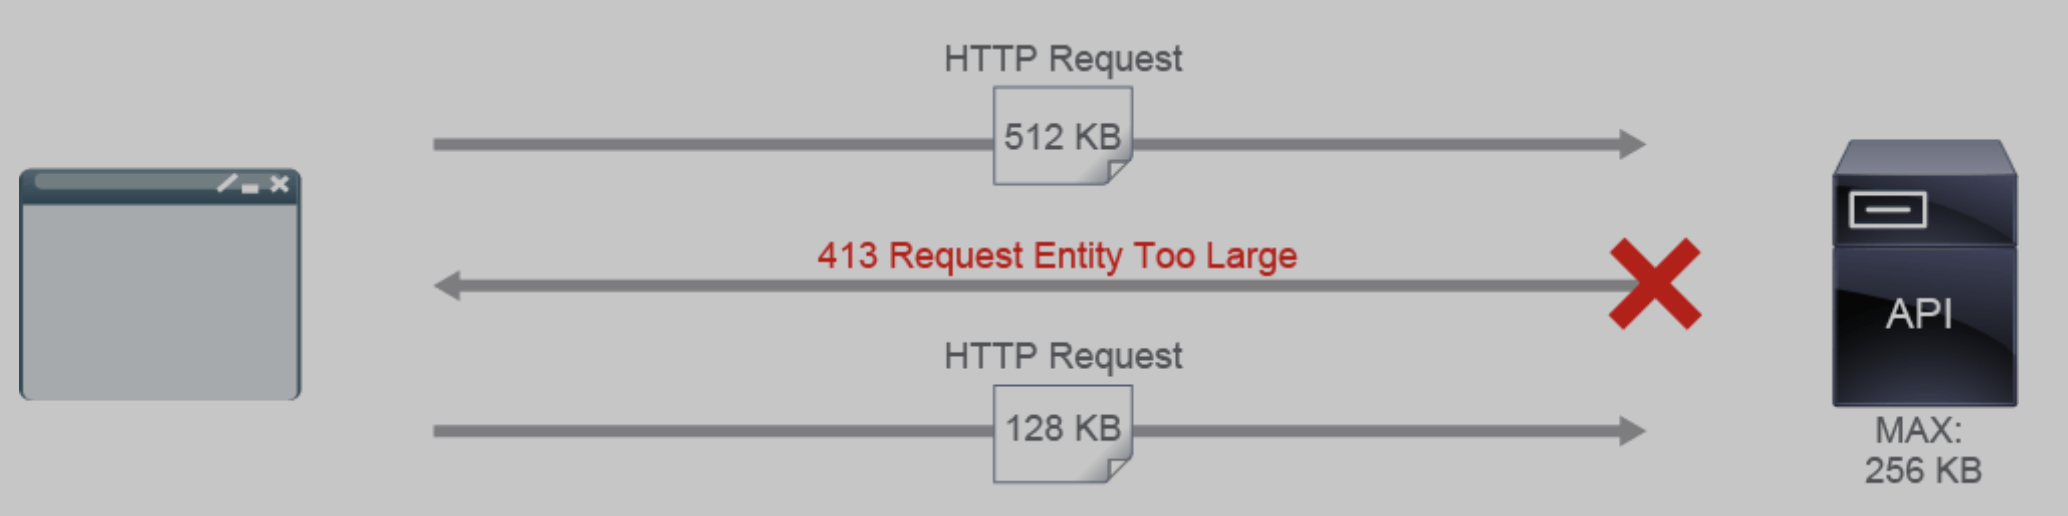 payload-limit.png